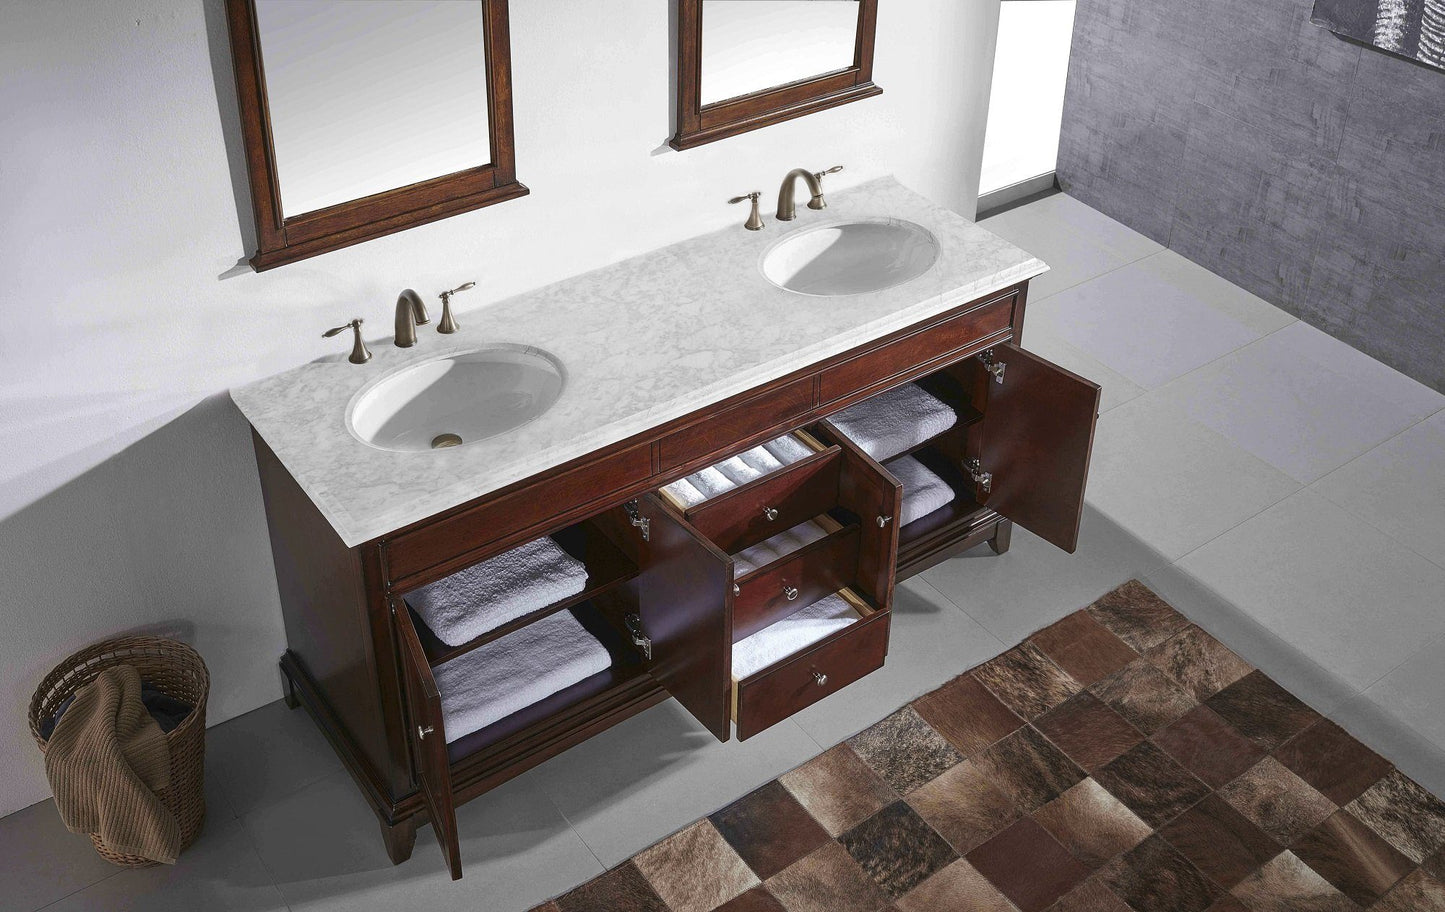 Eviva Elite Stamford 60" Brown Solid Wood Bathroom Vanity Set with Double OG White Carrara Marble Top & White Undermount Porcelain Sink - Luxe Bathroom Vanities Luxury Bathroom Fixtures Bathroom Furniture